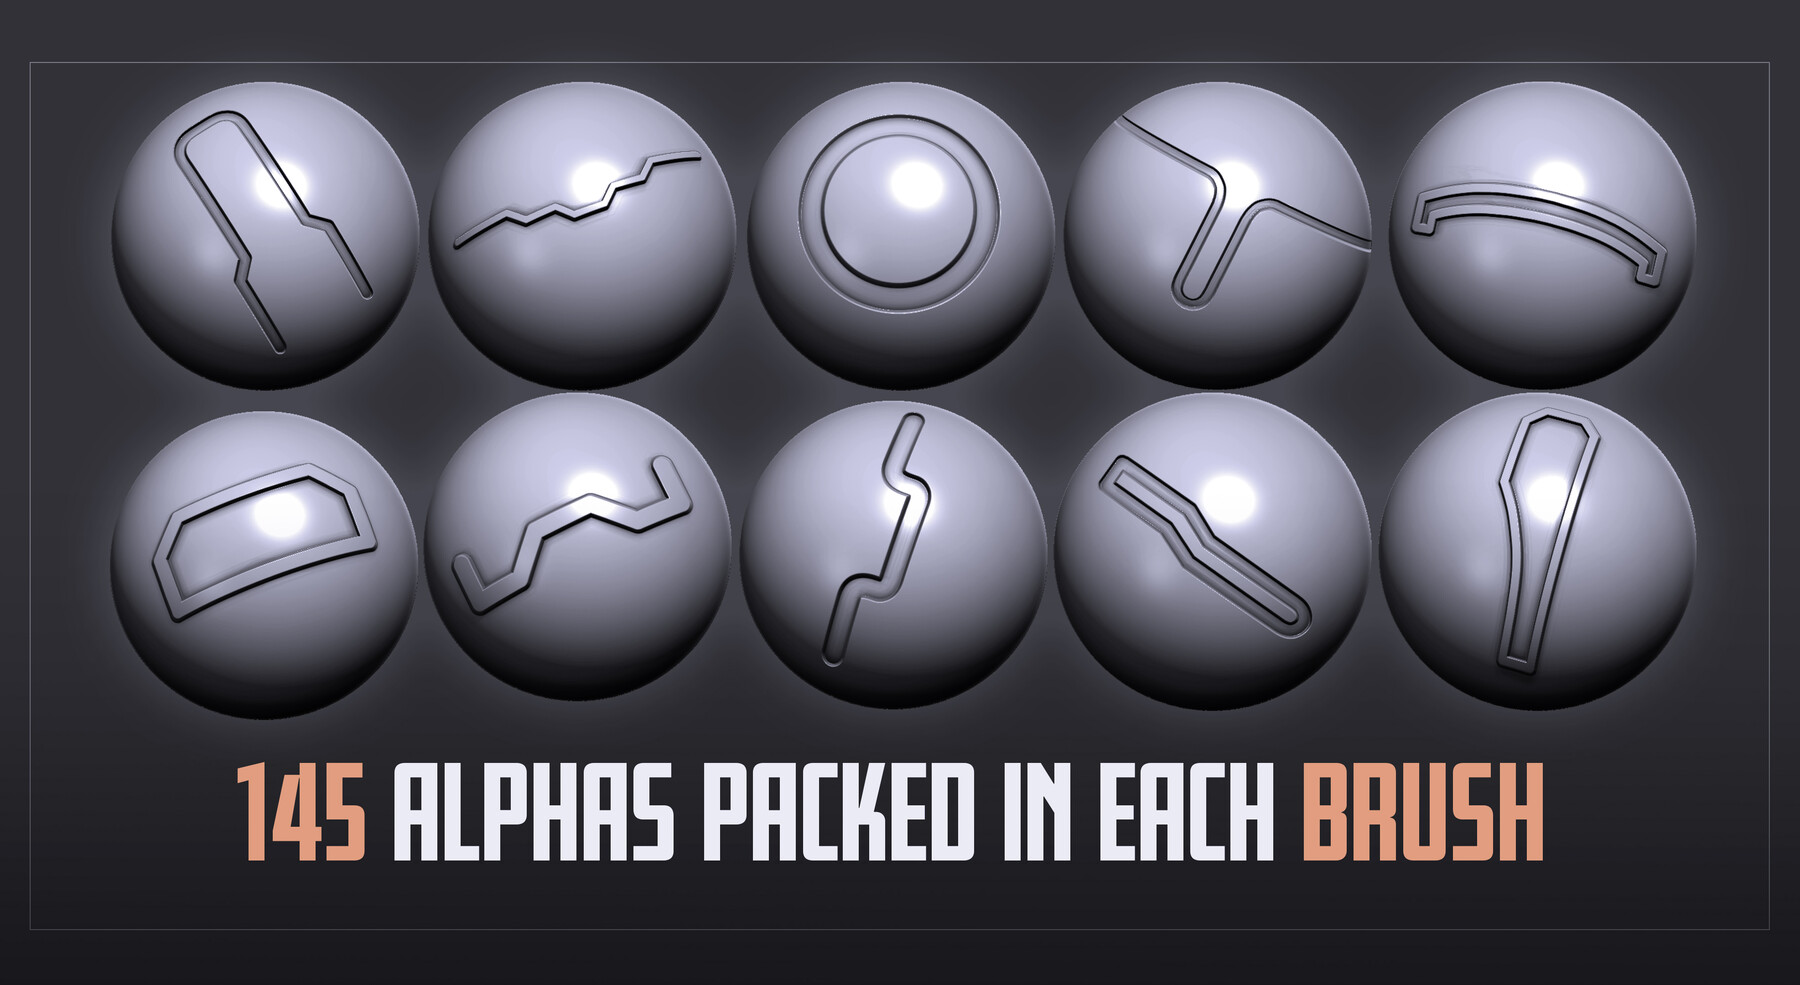 zbrush panel lines